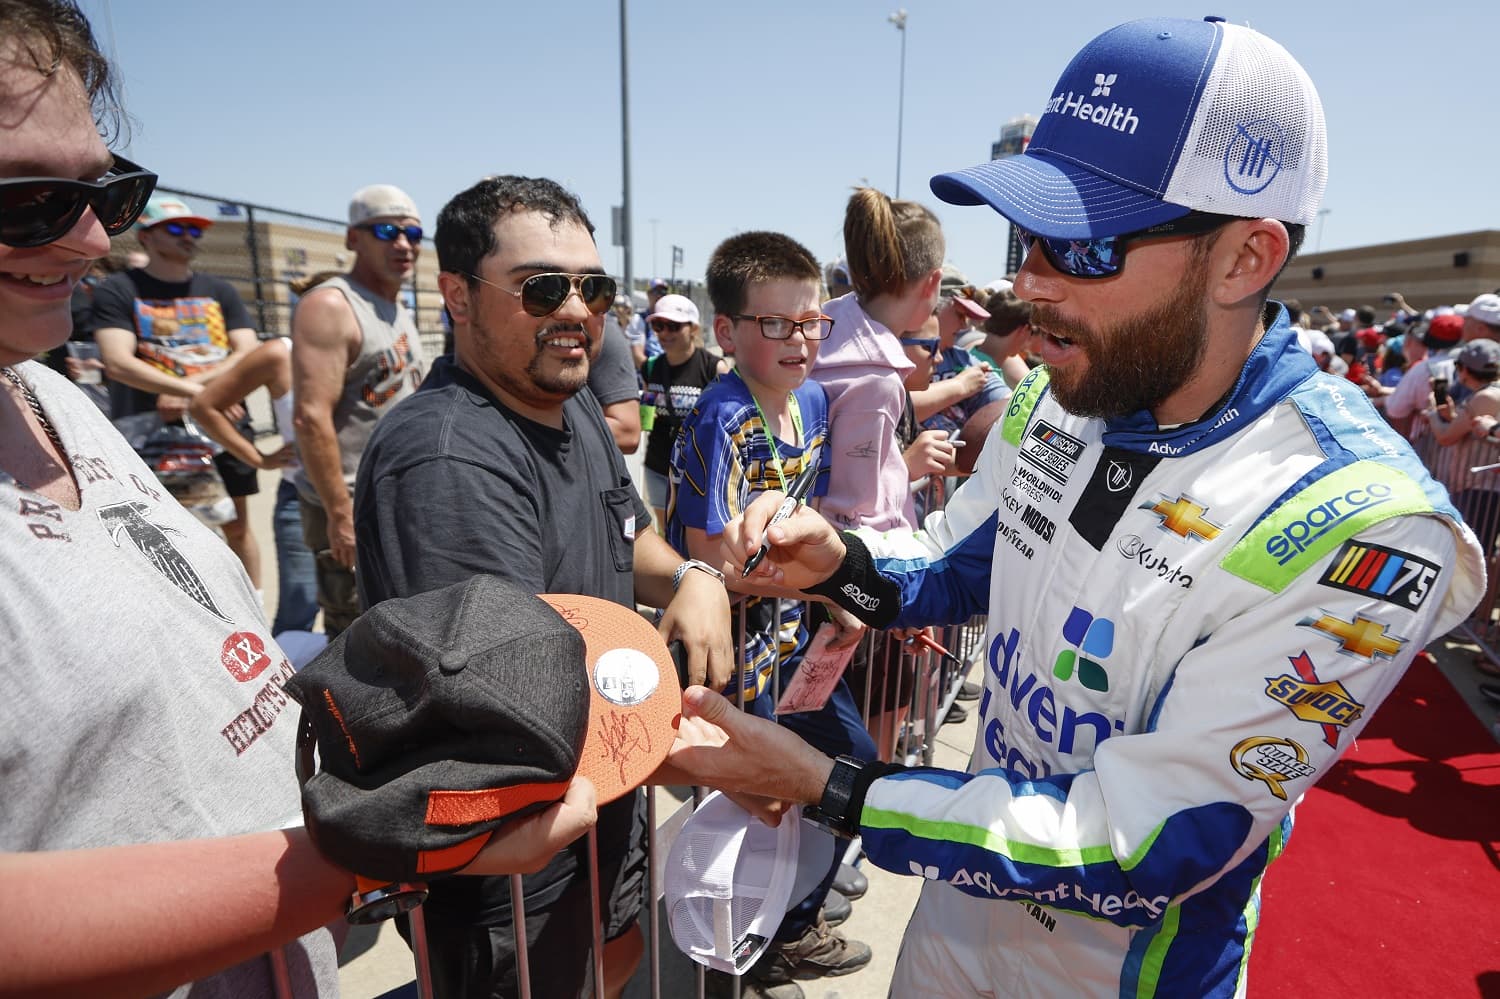 Ross Chastain signs autographs on the red carpet prior to the NASCAR Cup Series Advent Health 400 at Kansas Speedway on May 7, 2023.